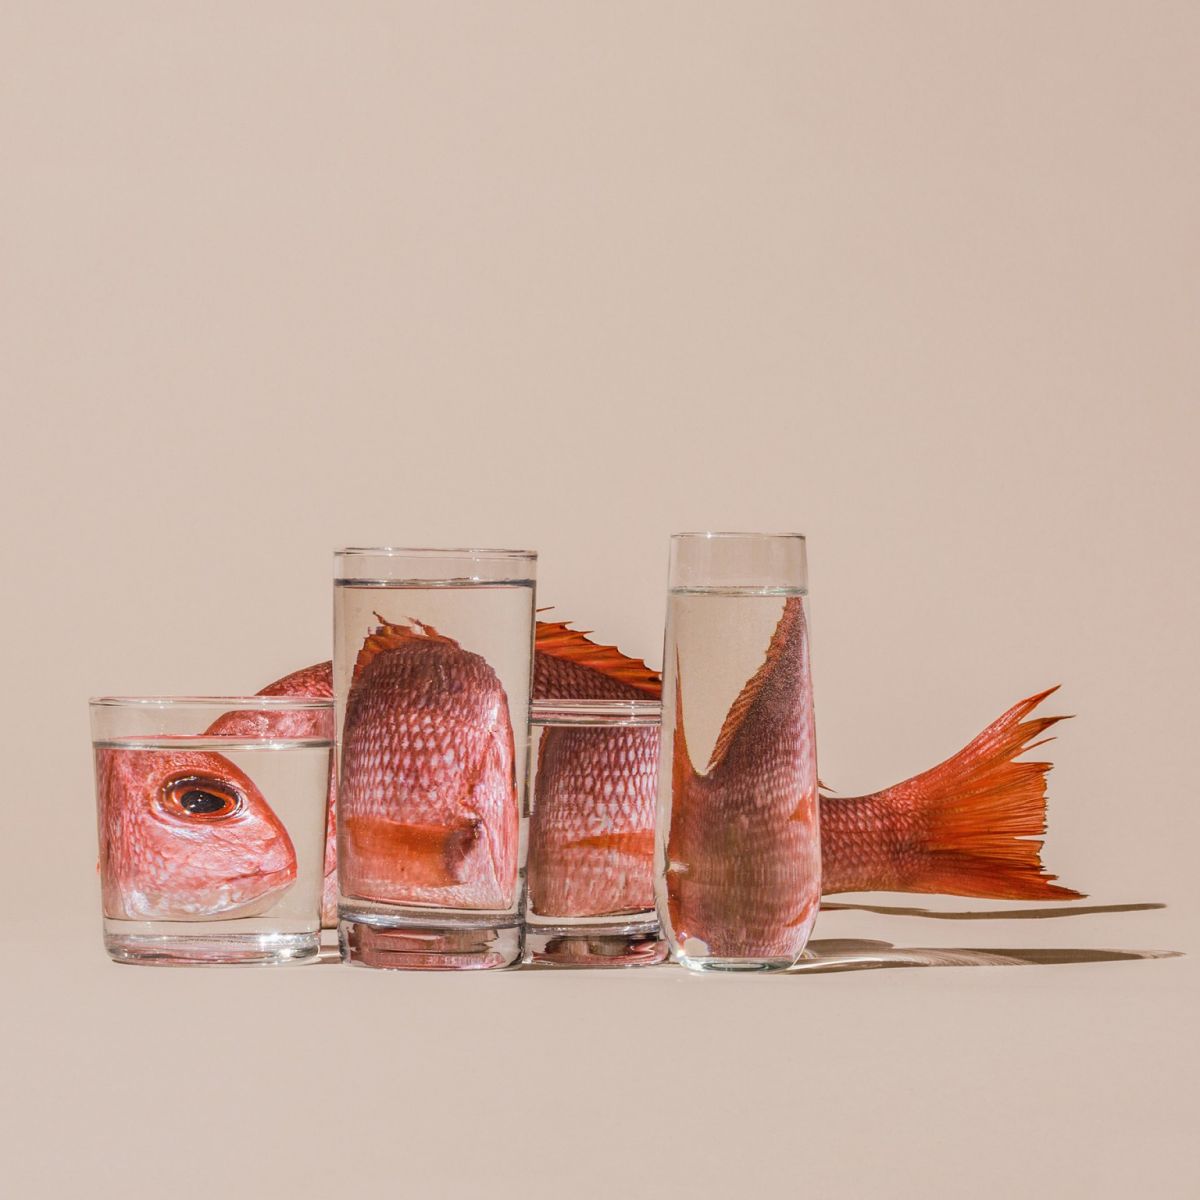 2 still life photography by suzanne saroff